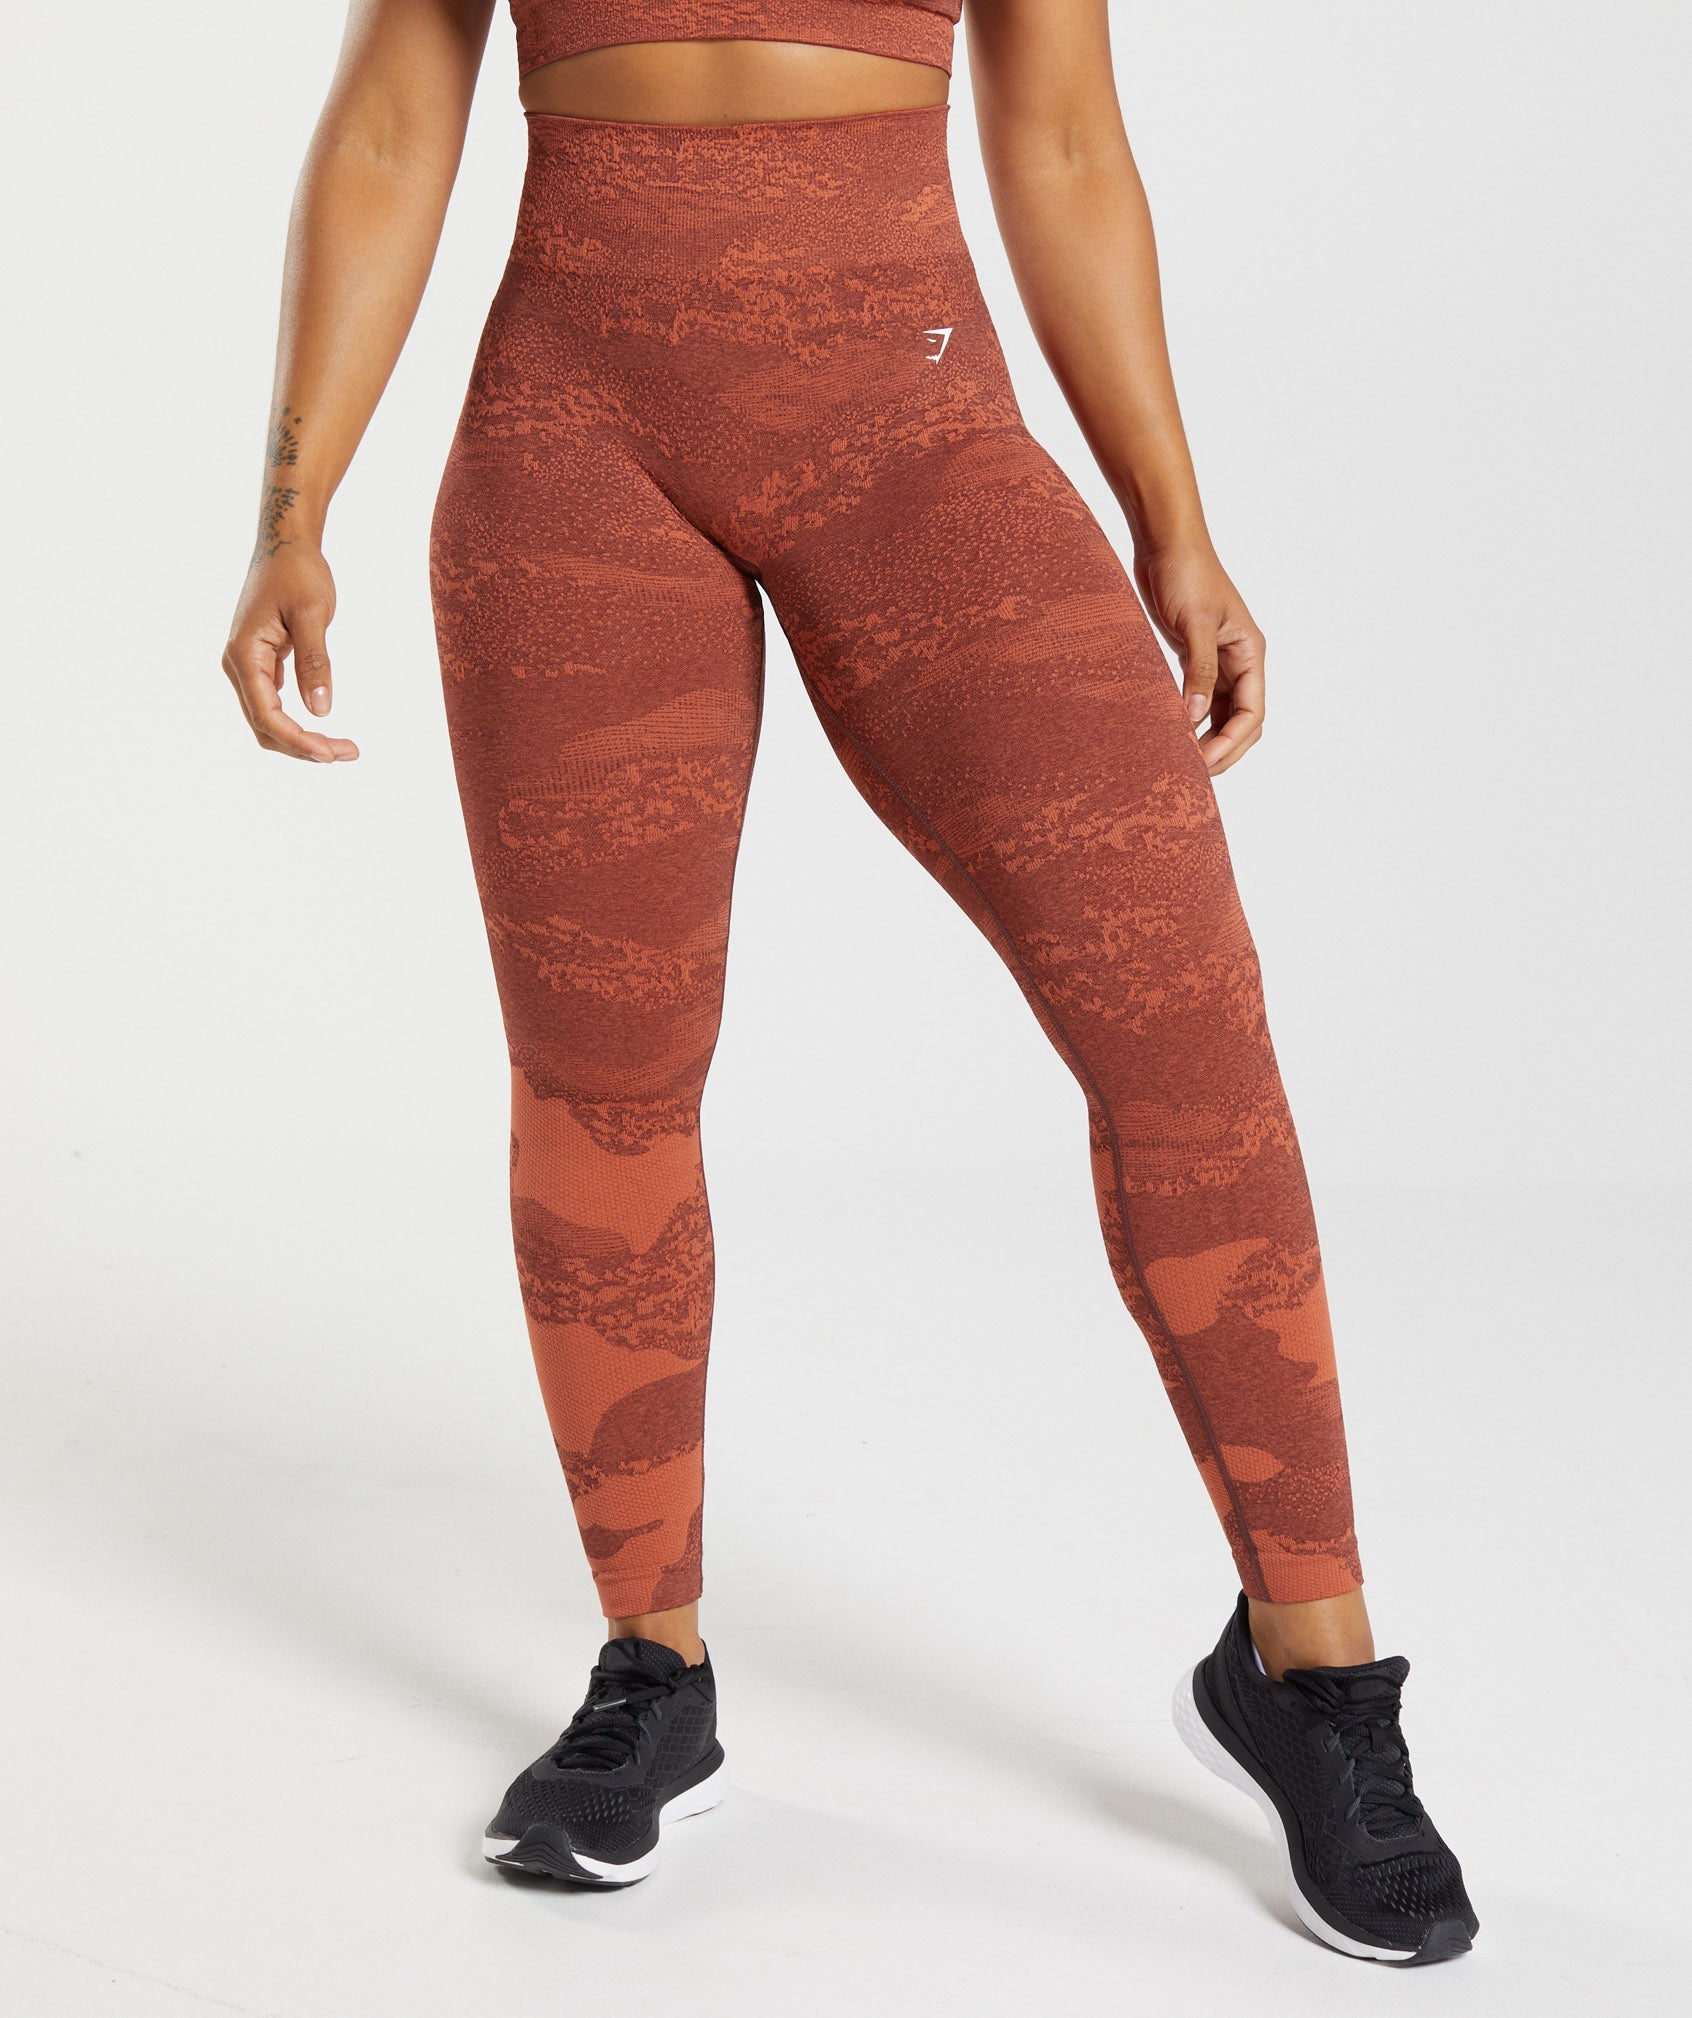 Jean Teal Camo Leggings – Happy Being Well